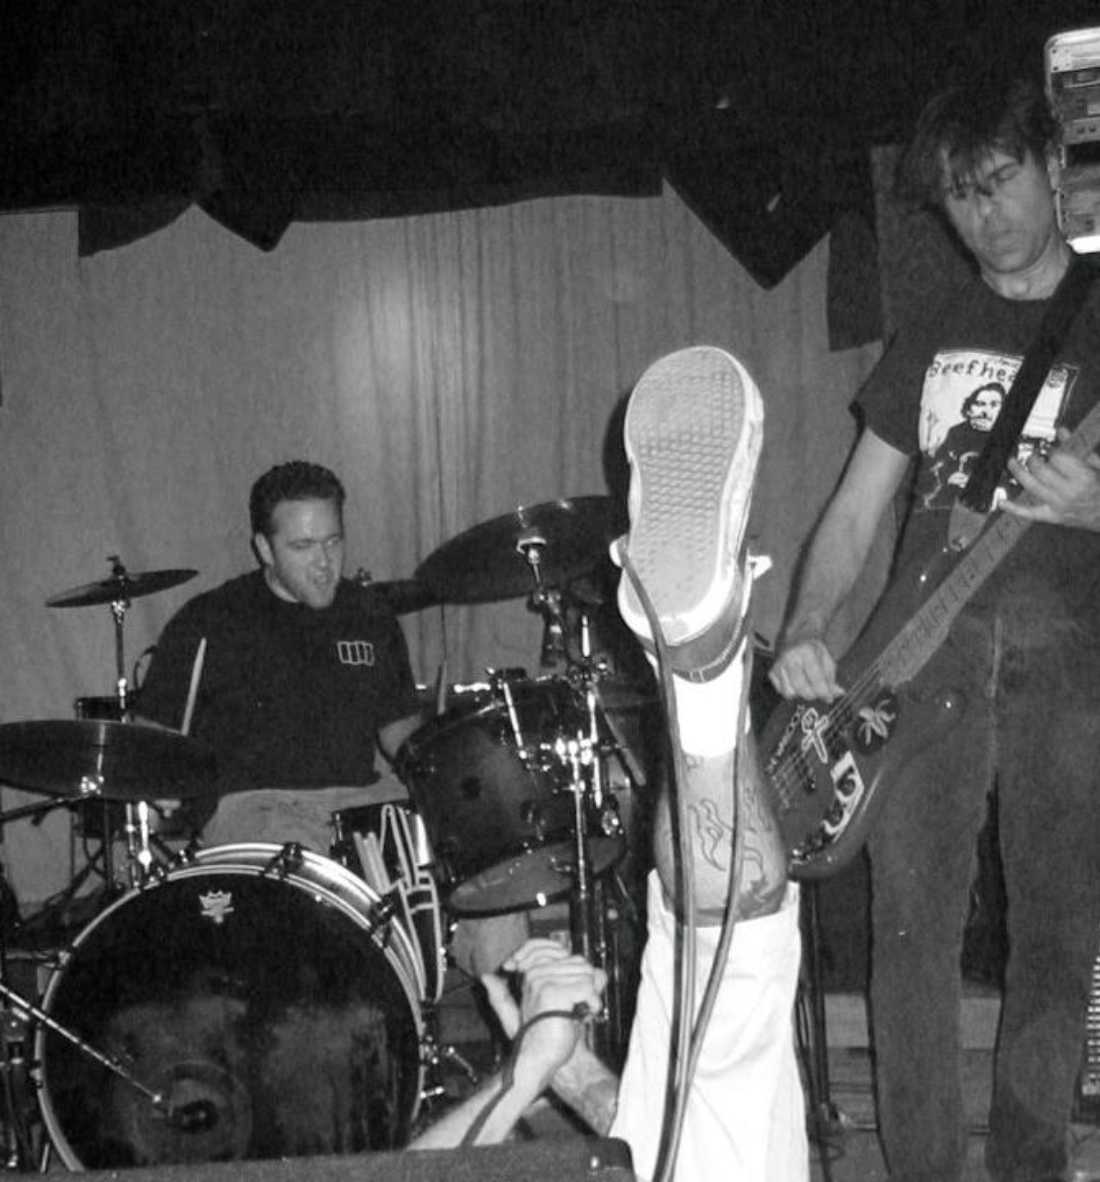 Legendary Fort Worth punk-rockers The Gideons are reuniting on Thursday, Oct. 25, at 1919 for the express purpose of flipping wigs.